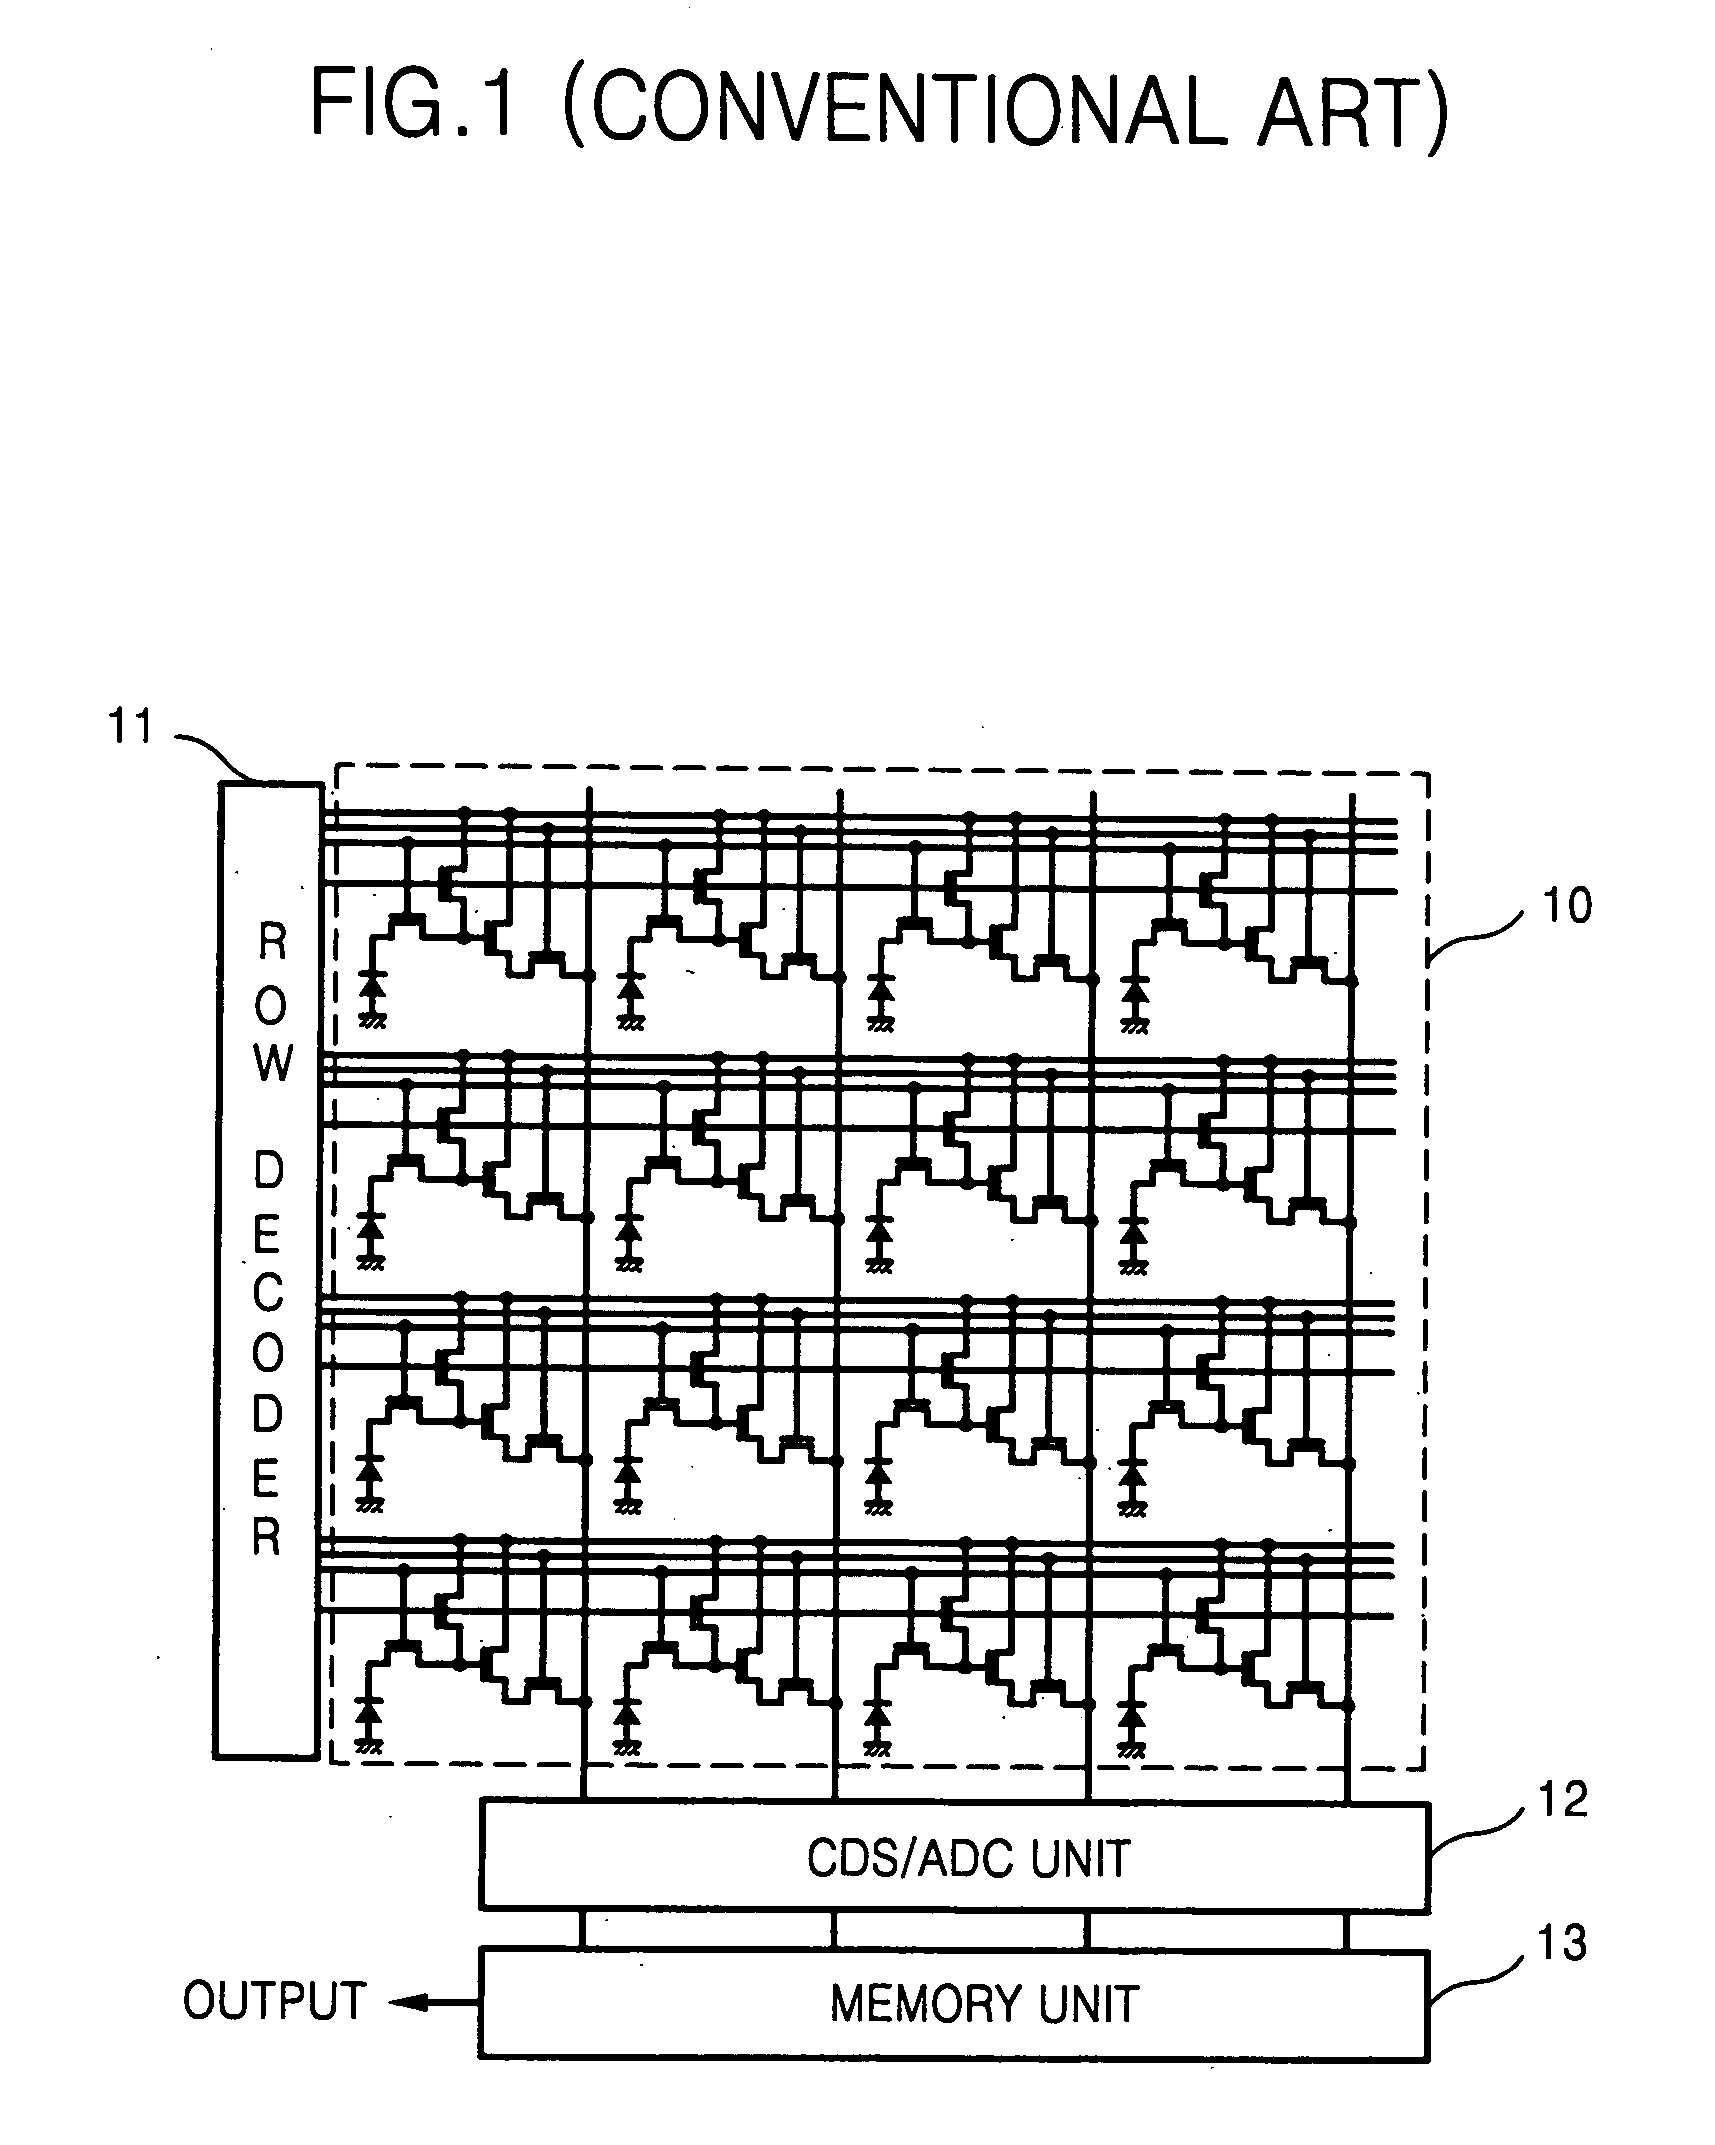 Offset correction during correlated double sampling in CMOS image sensor